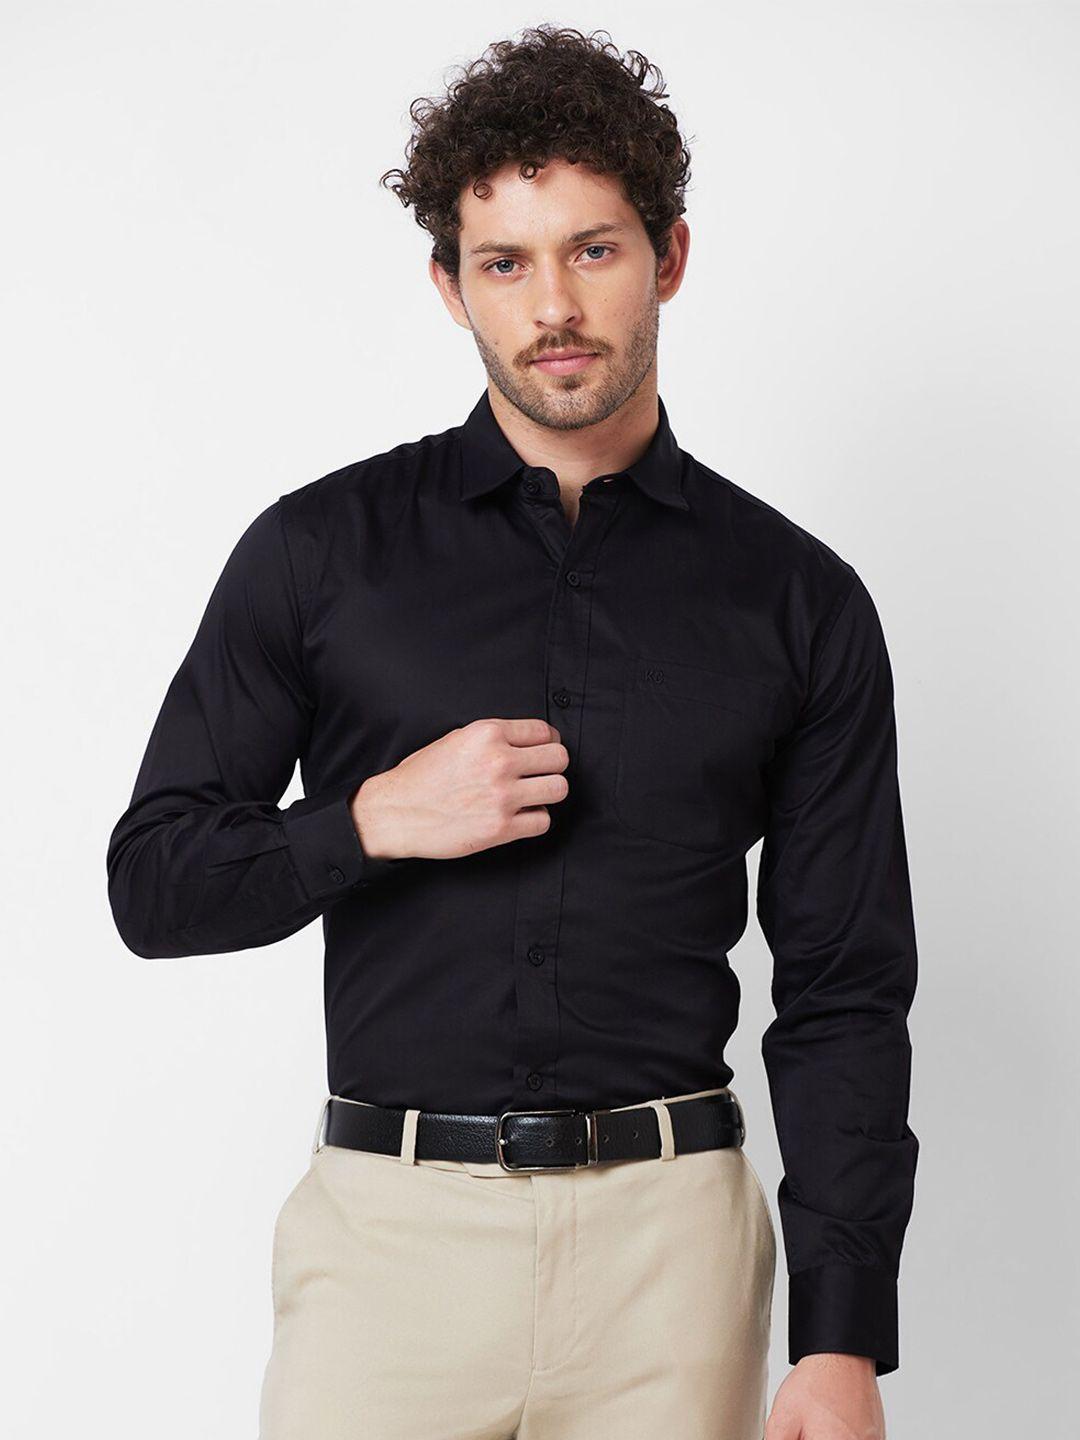 Kenneth Cole Cotton Slim Fit Opaque Formal Shirt